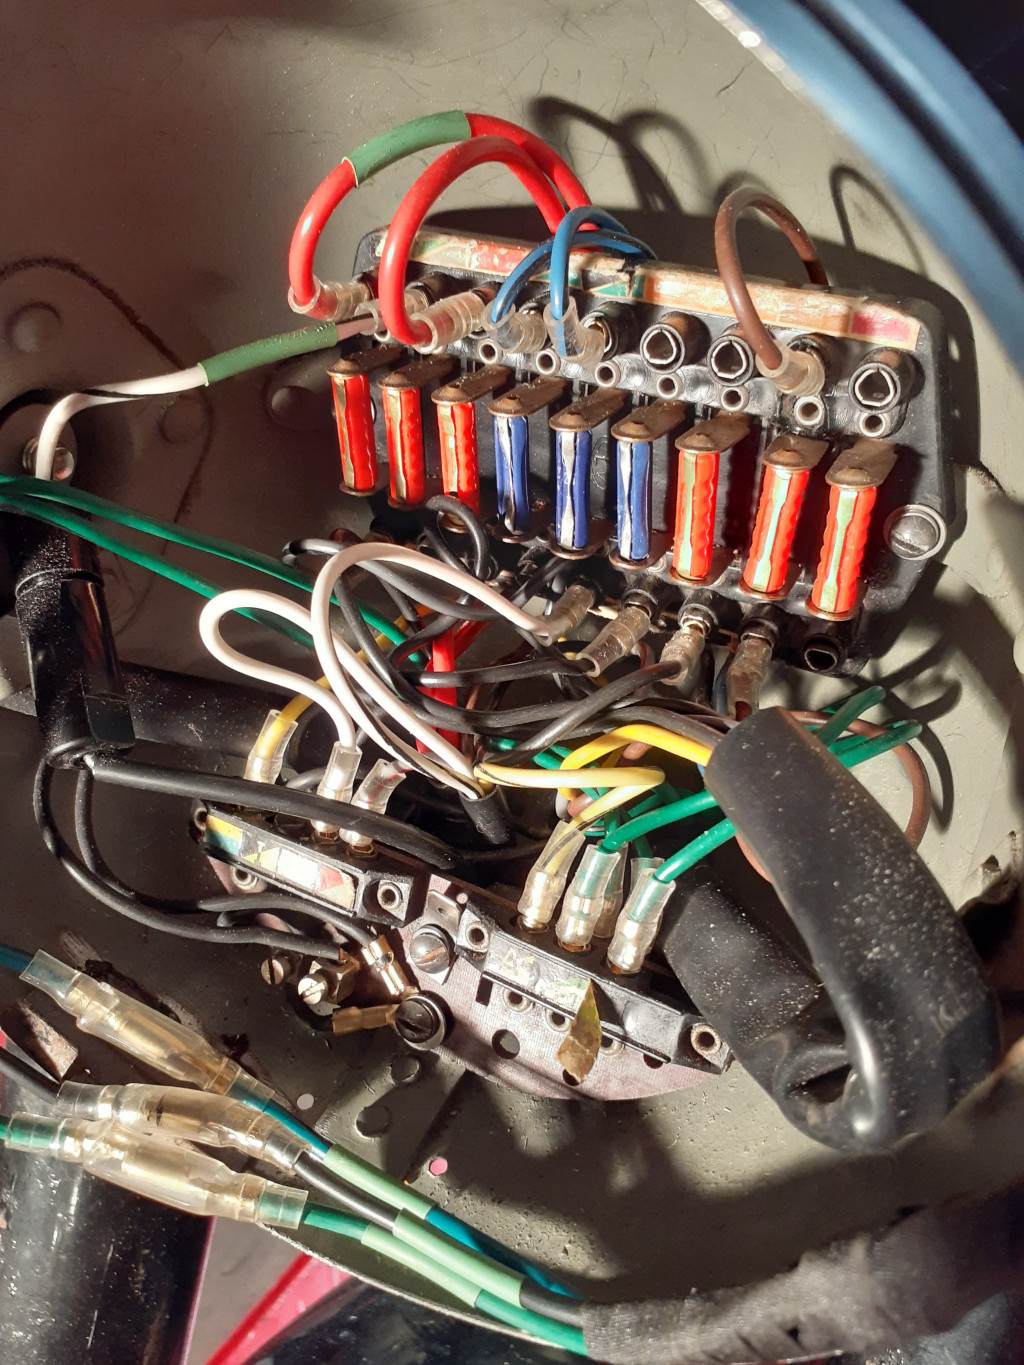 A good view of the connections inside a standard police headlight bucket.